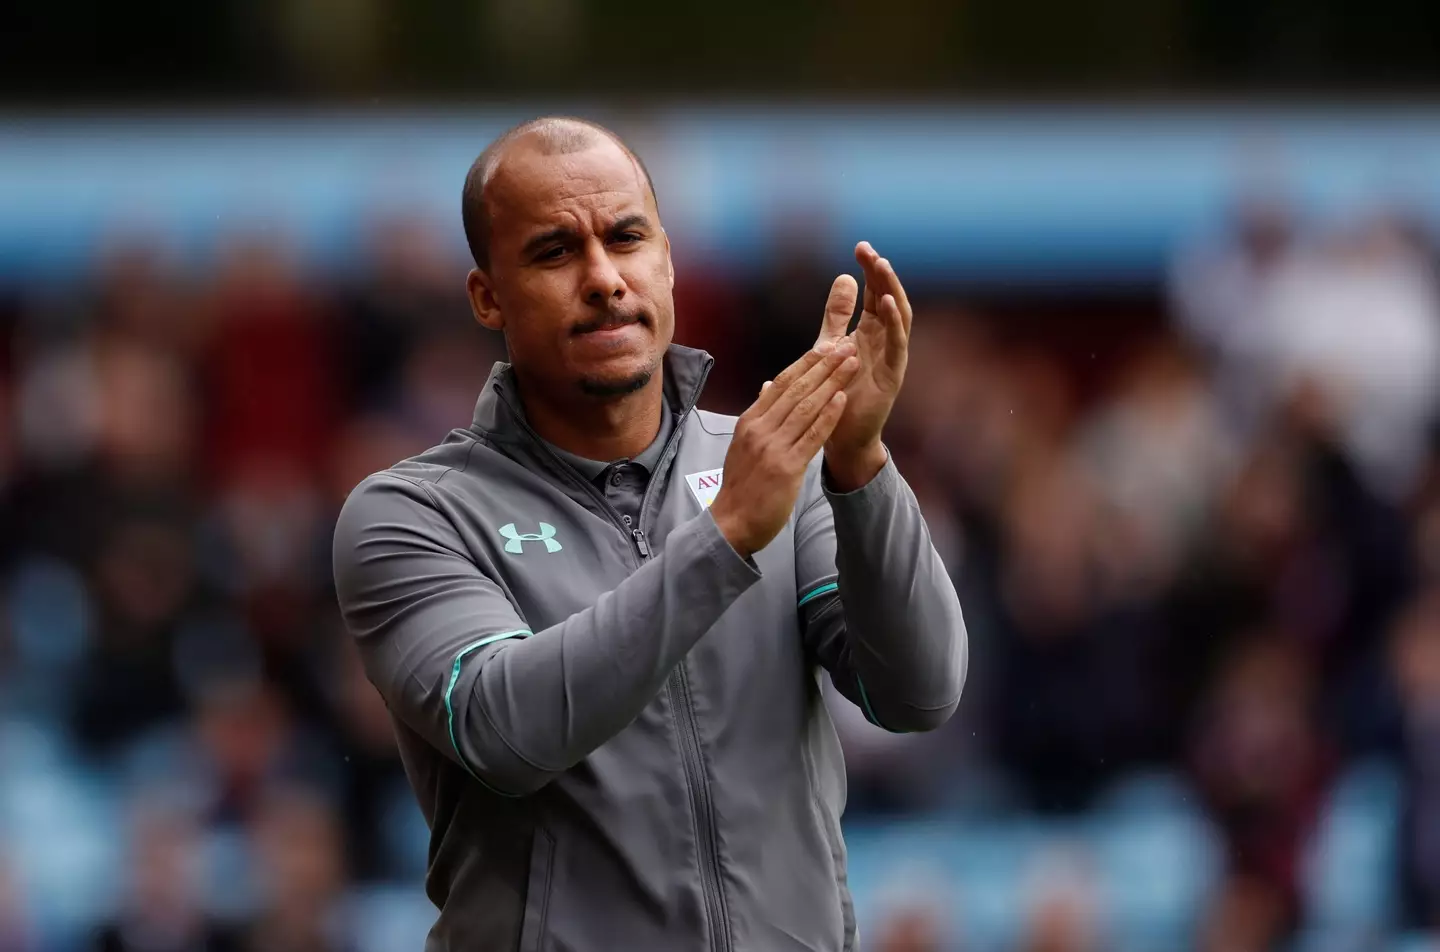 Former Aston Villa striker Gabby Agbonlahor told SPORTbible he would be worth “probably” £50m in today’s transfer market.